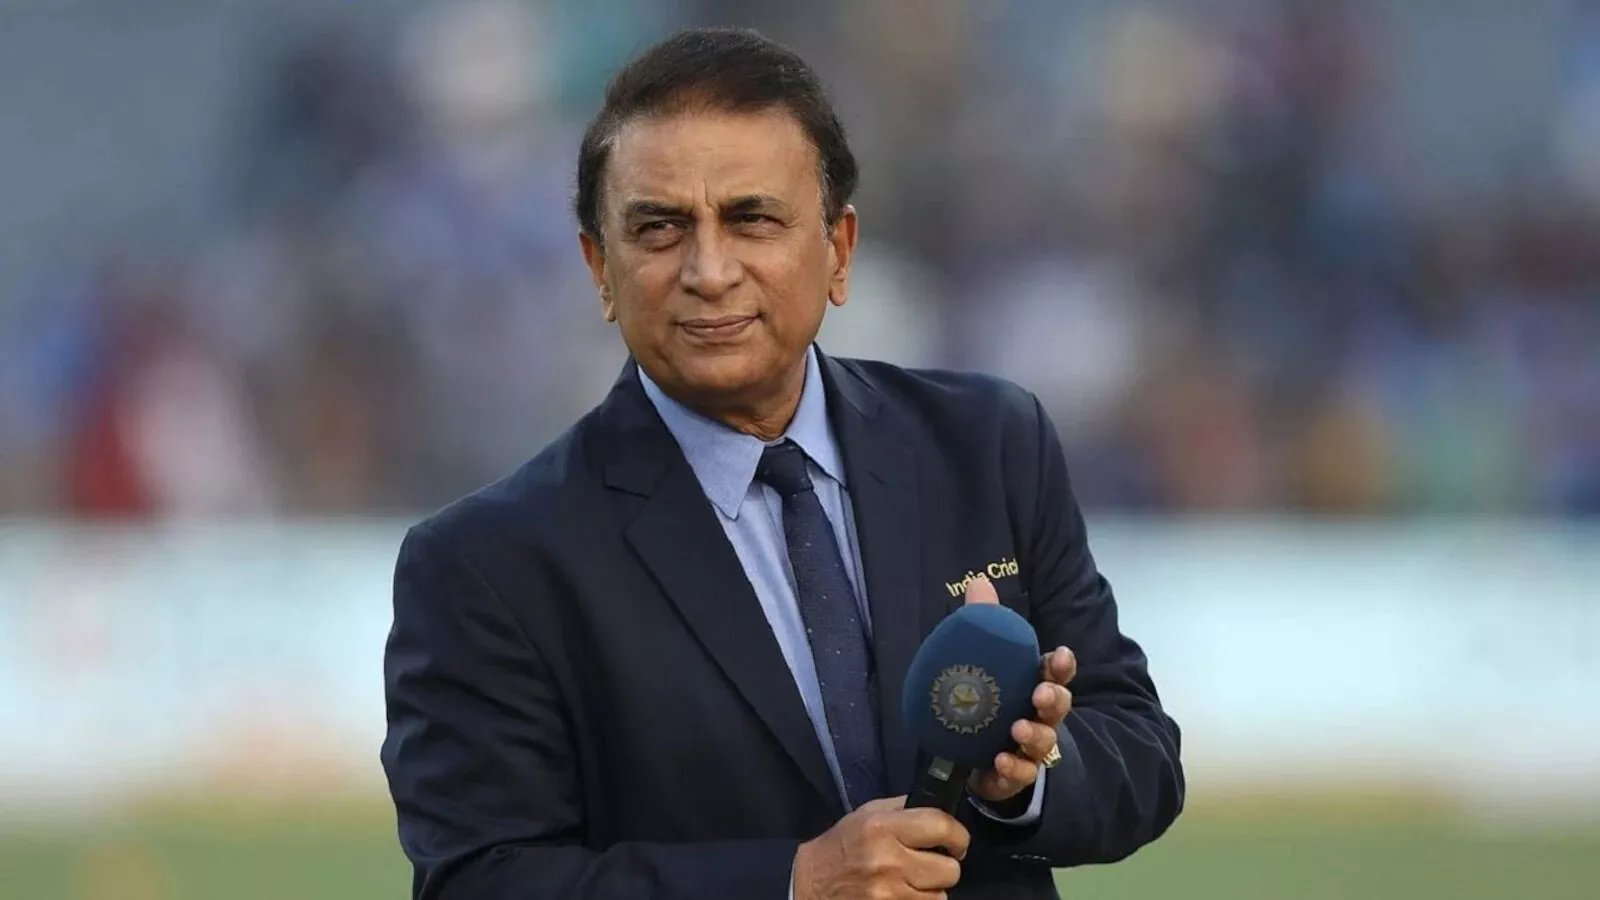 “Biggest test for India will be to adapt from T20 format to Test cricket” – Sunil Gavaskar ahead of WTC final